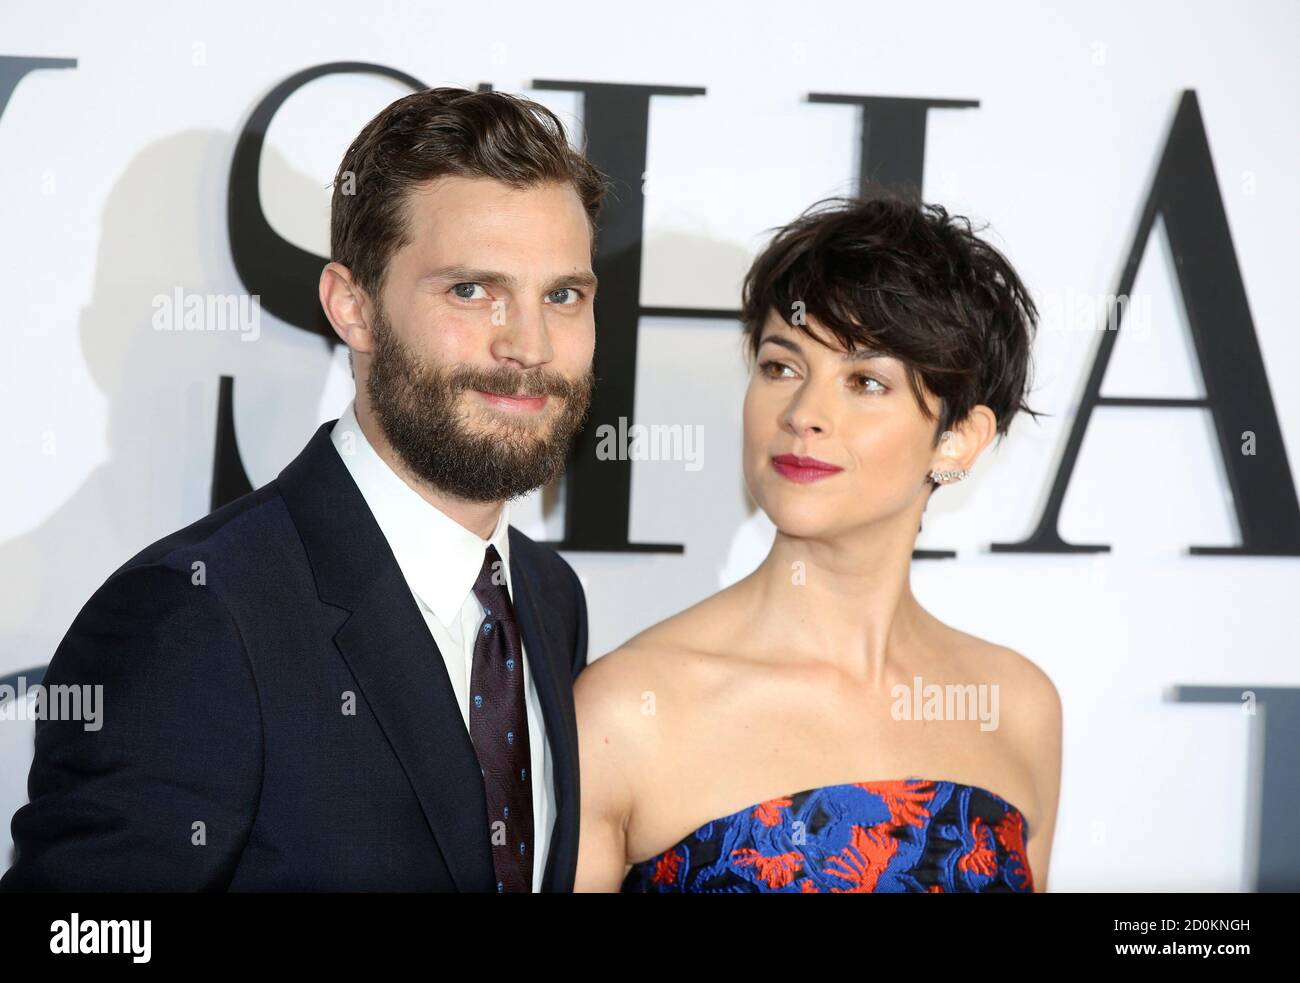 Cast member Jamie Dornan and his wife Amelia Warner arrive for the British  premiere of the movie 'Fifty Shades of Grey' in London February 12, 2015.  REUTERS/Paul Hackett (BRITAIN - Tags: ENTERTAINMENT